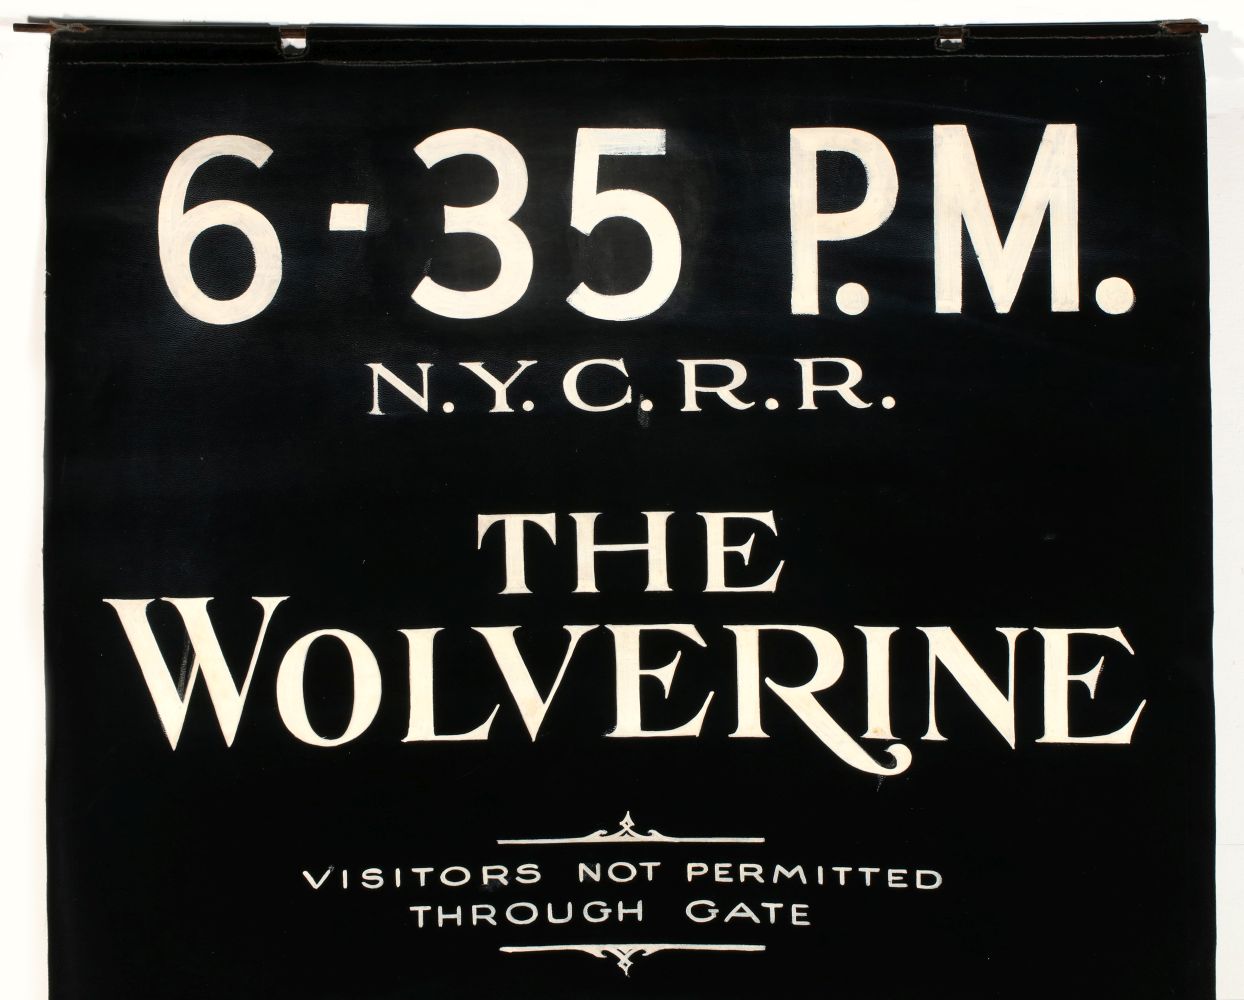 A PAINTED GATE SIGN FOR N.Y.C.R.R. 'THE WOLVERINE'